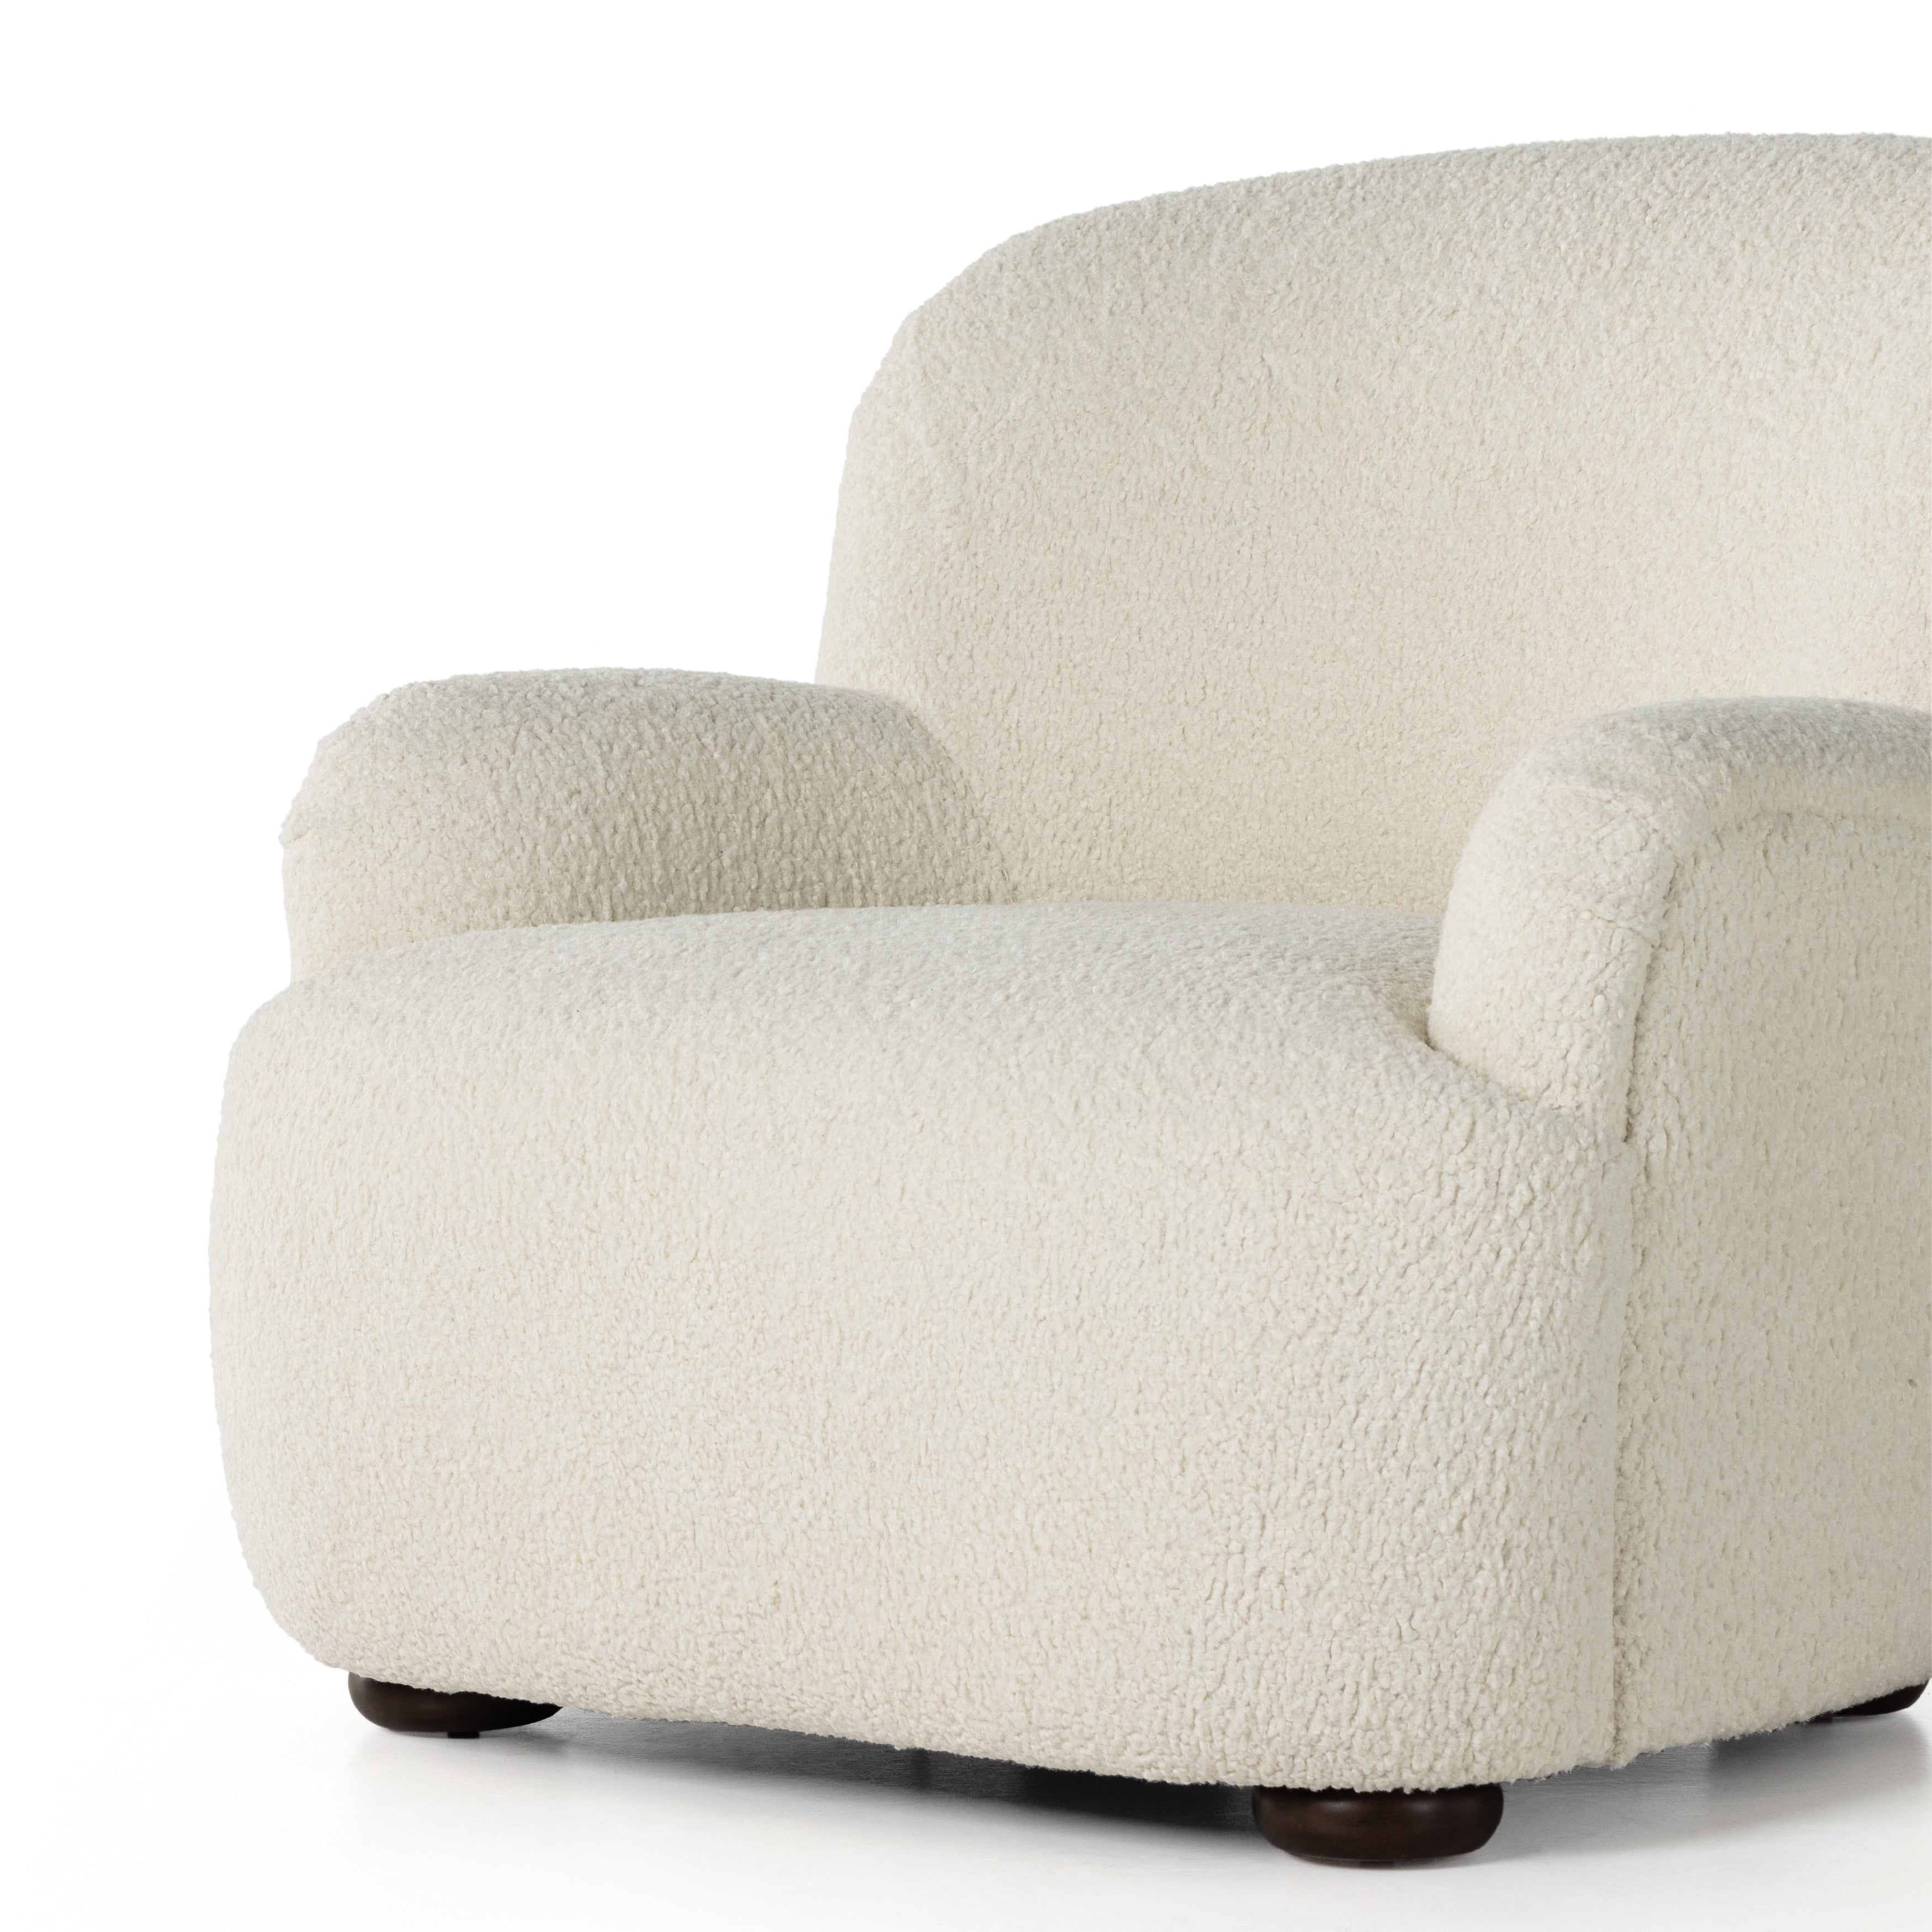 Kadon Sheepskin Natural Chair's high wing back pairs with softly rolled arms for a curvy look and supportive sit. Cream shearling-like upholstery invites you to sit and stay a while Amethyst Home provides interior design services, furniture, rugs, and lighting in the Miami metro area. 